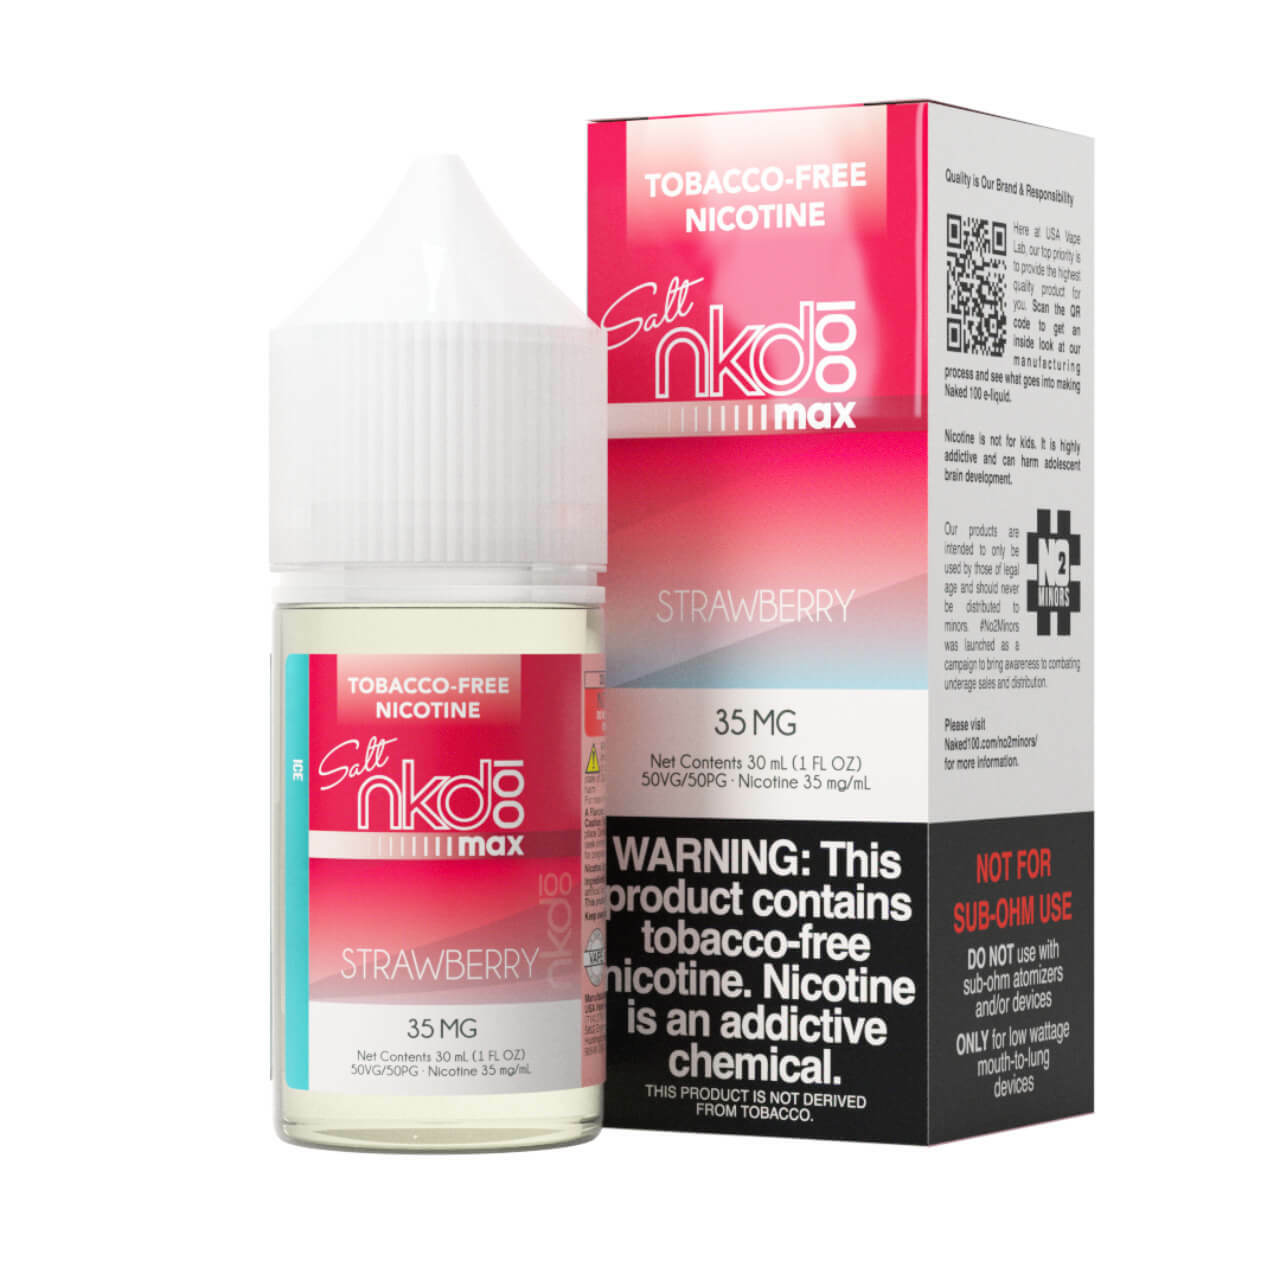 Max Strawberry Ice by Naked Max 30ml